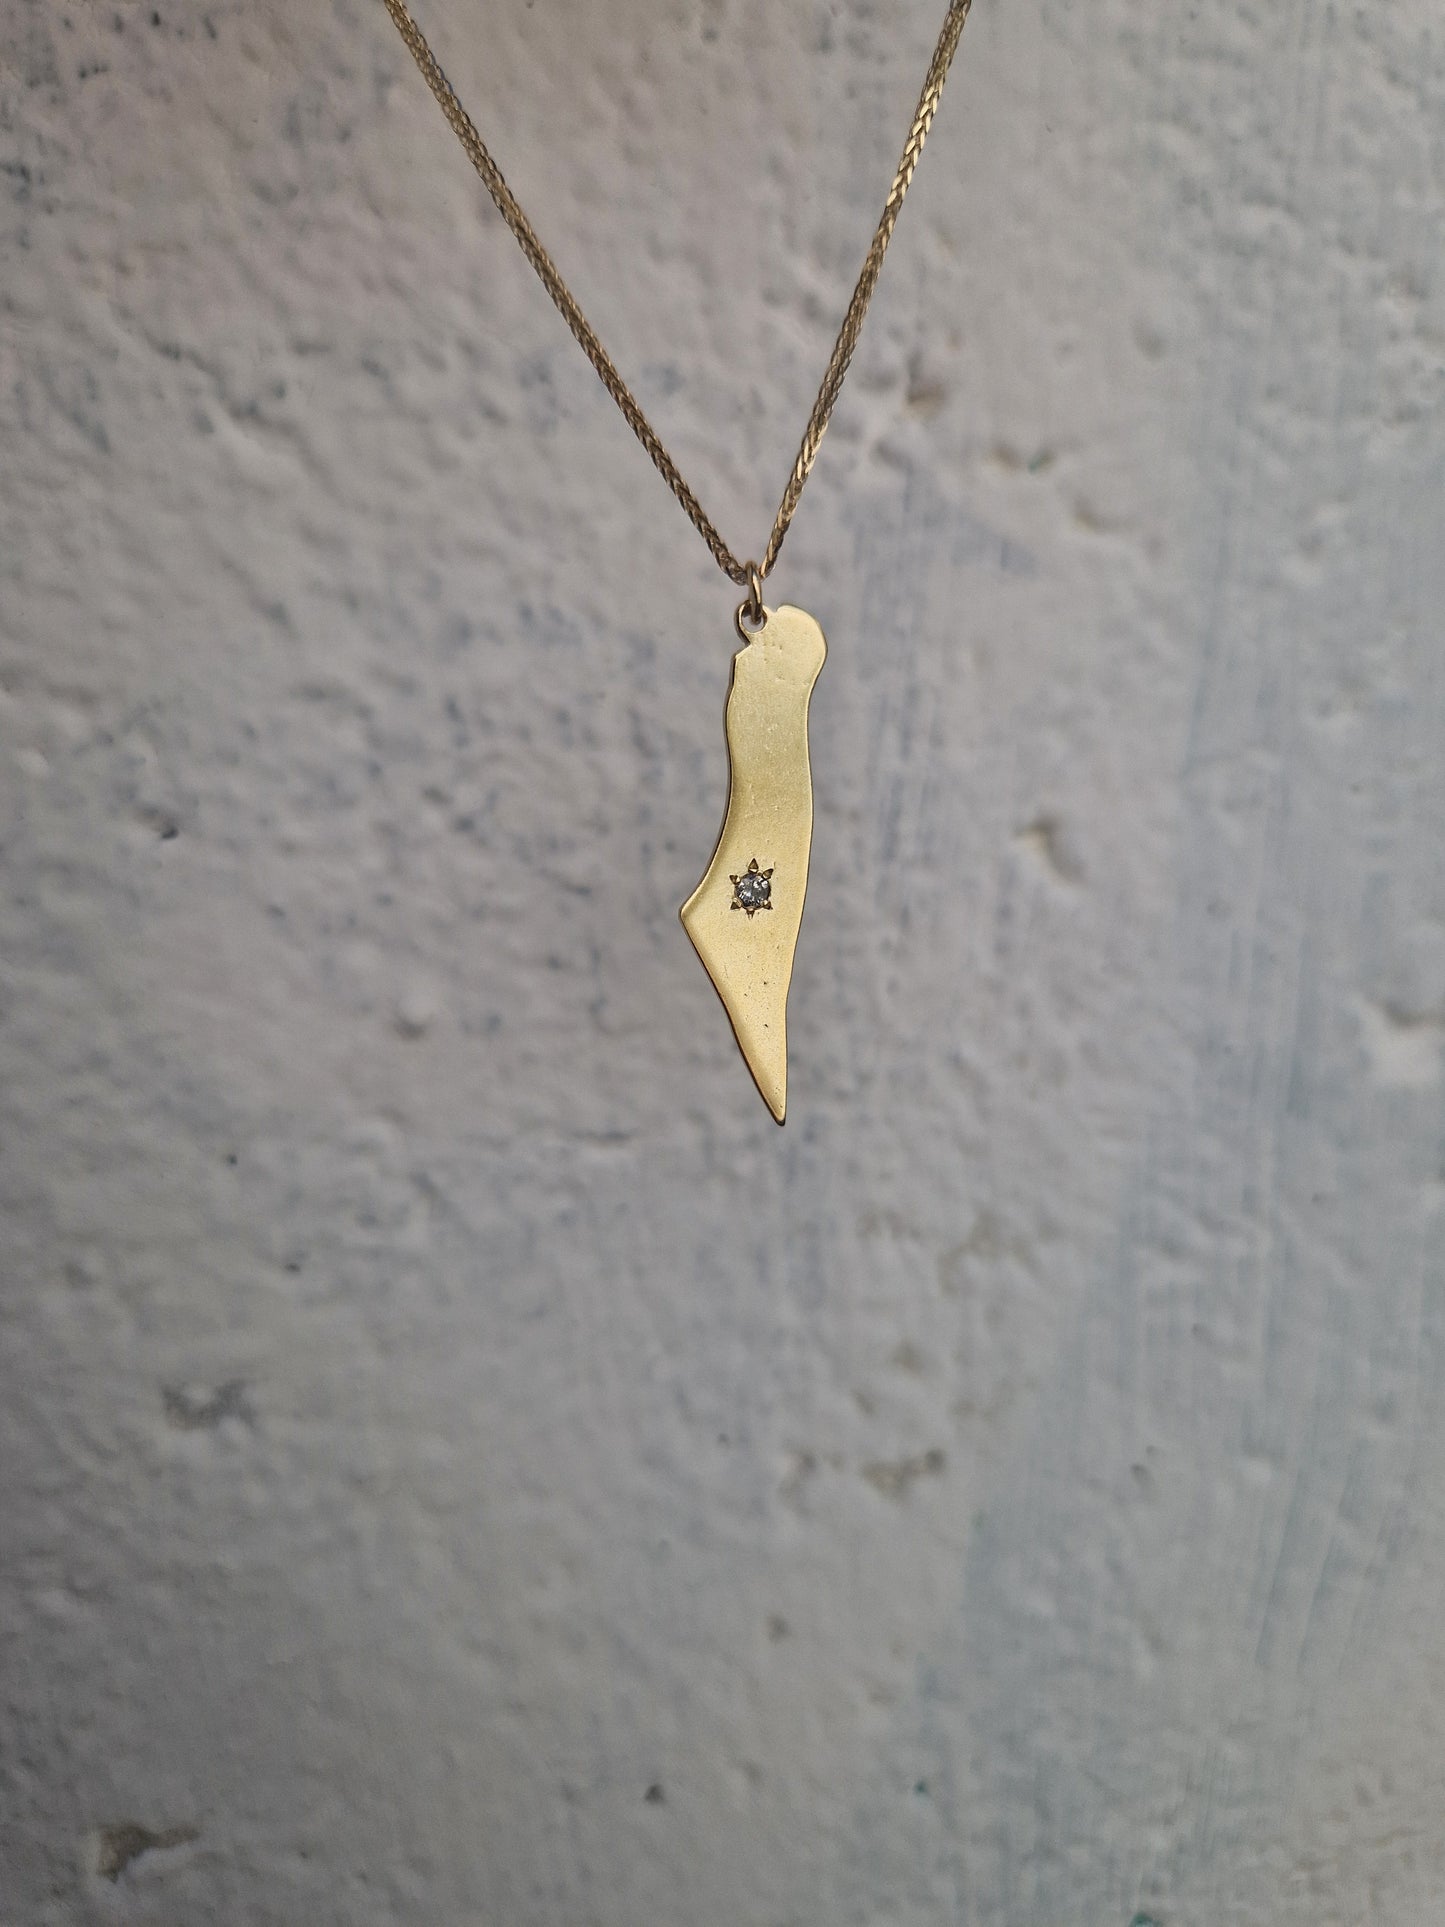 Map of Israel Diamond Necklace in 14k